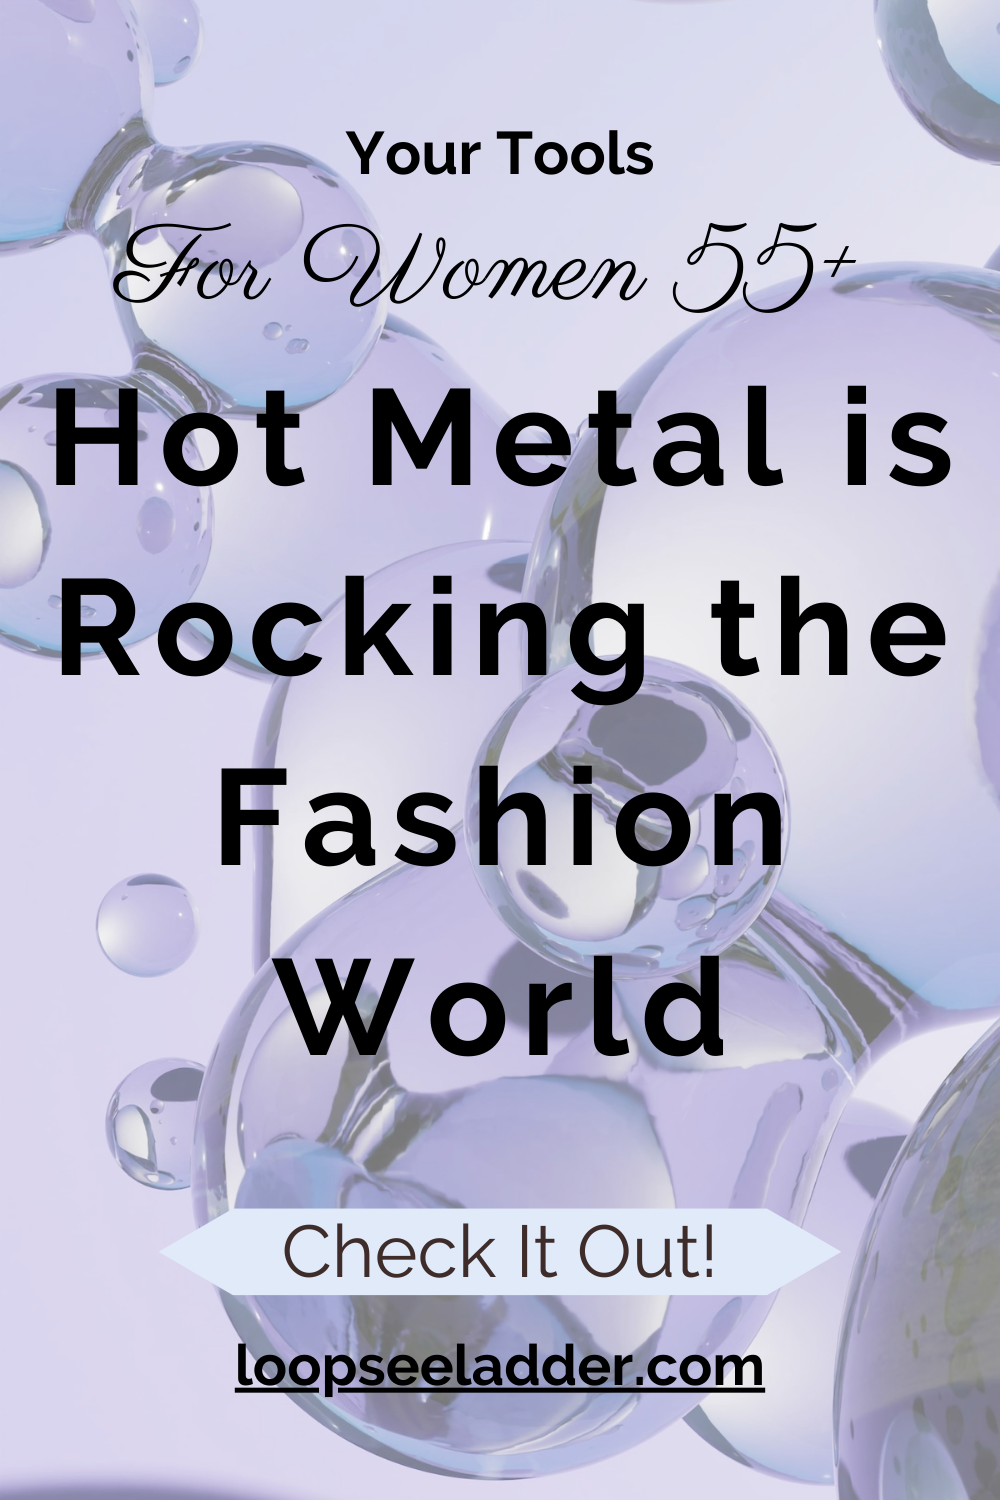 The Hot Metal Revolution: How Women 55+ Are Rocking the Fashion World